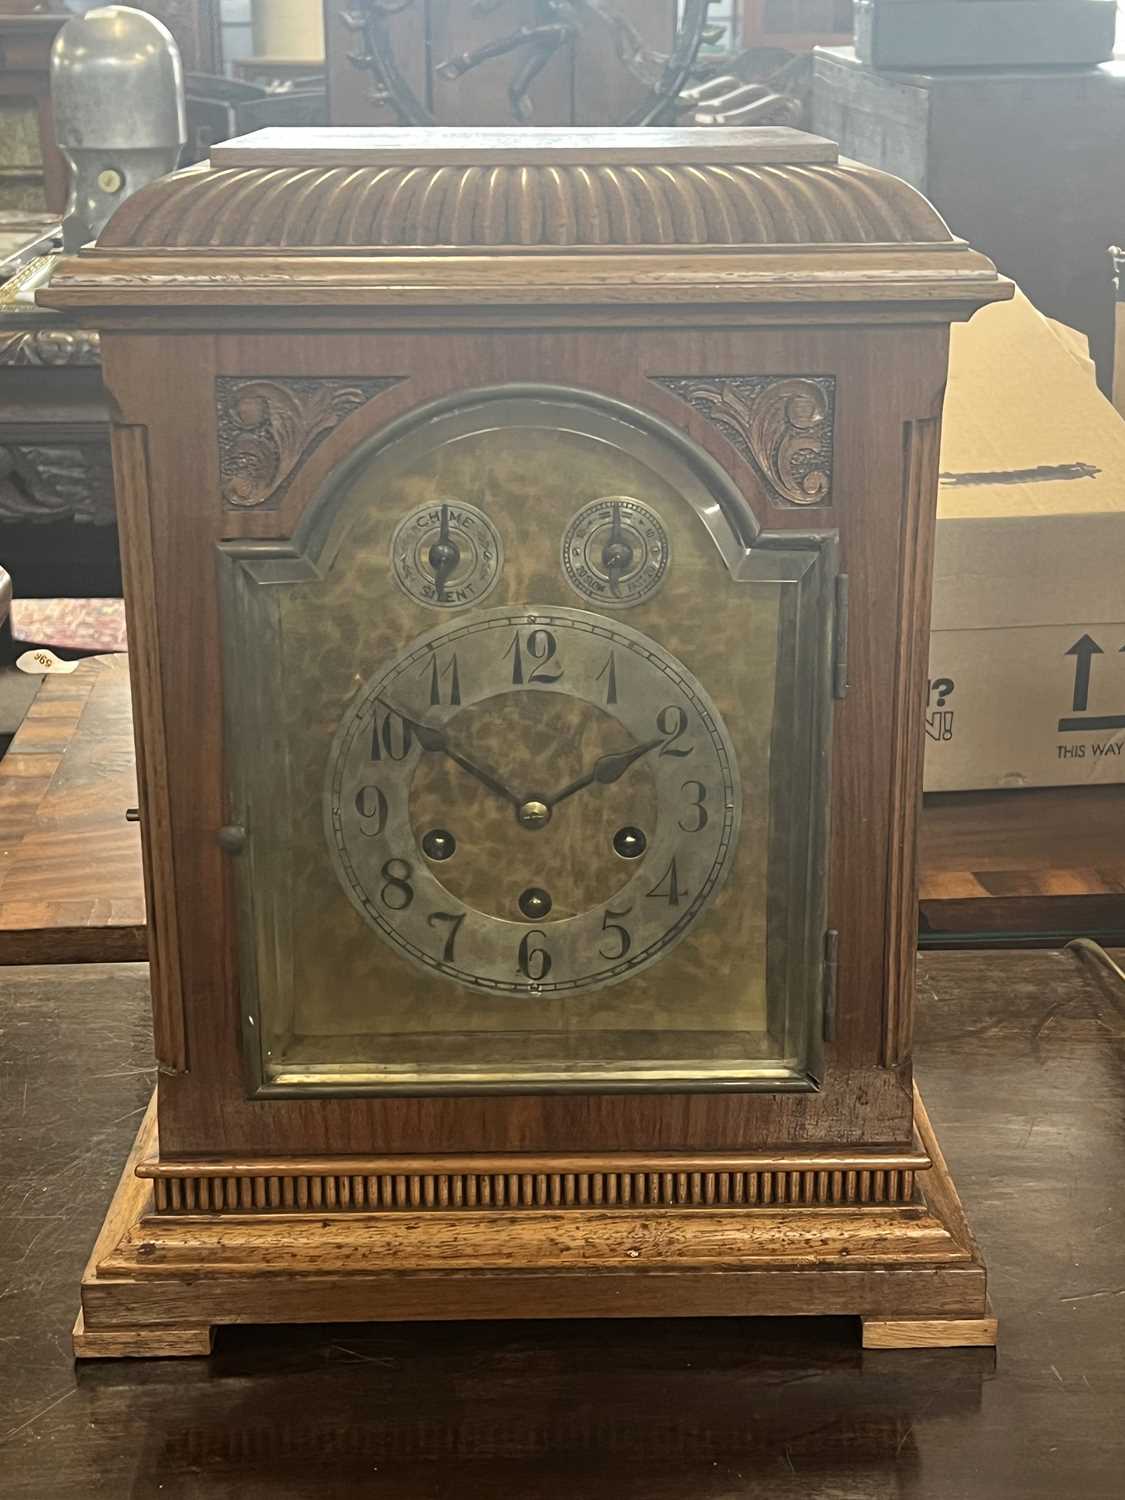 Early 20th Century mantel clock by Jung Hans with arched brass and silver dial, three train brass - Image 3 of 3